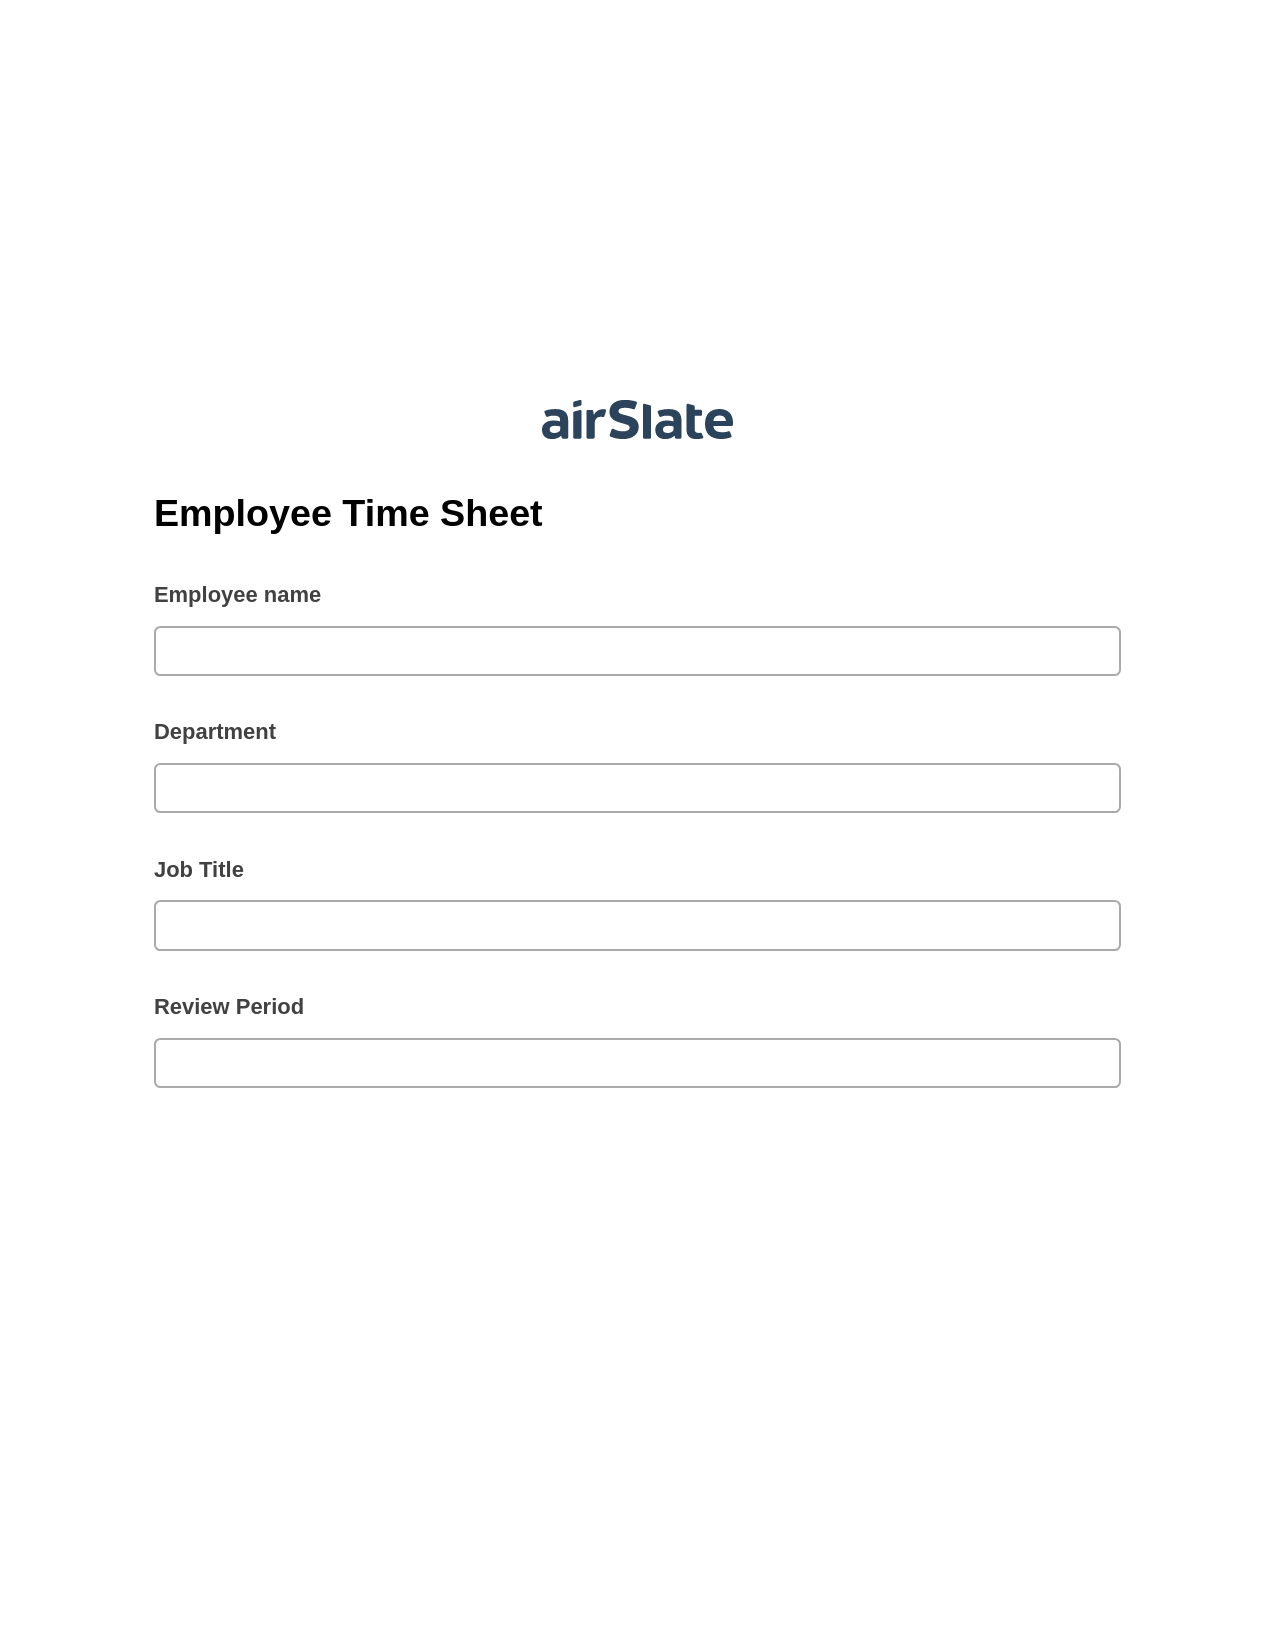 Employee Time Sheet Pre-fill from Office 365 Excel Bot, Update Audit Trail Bot, Export to Smartsheet